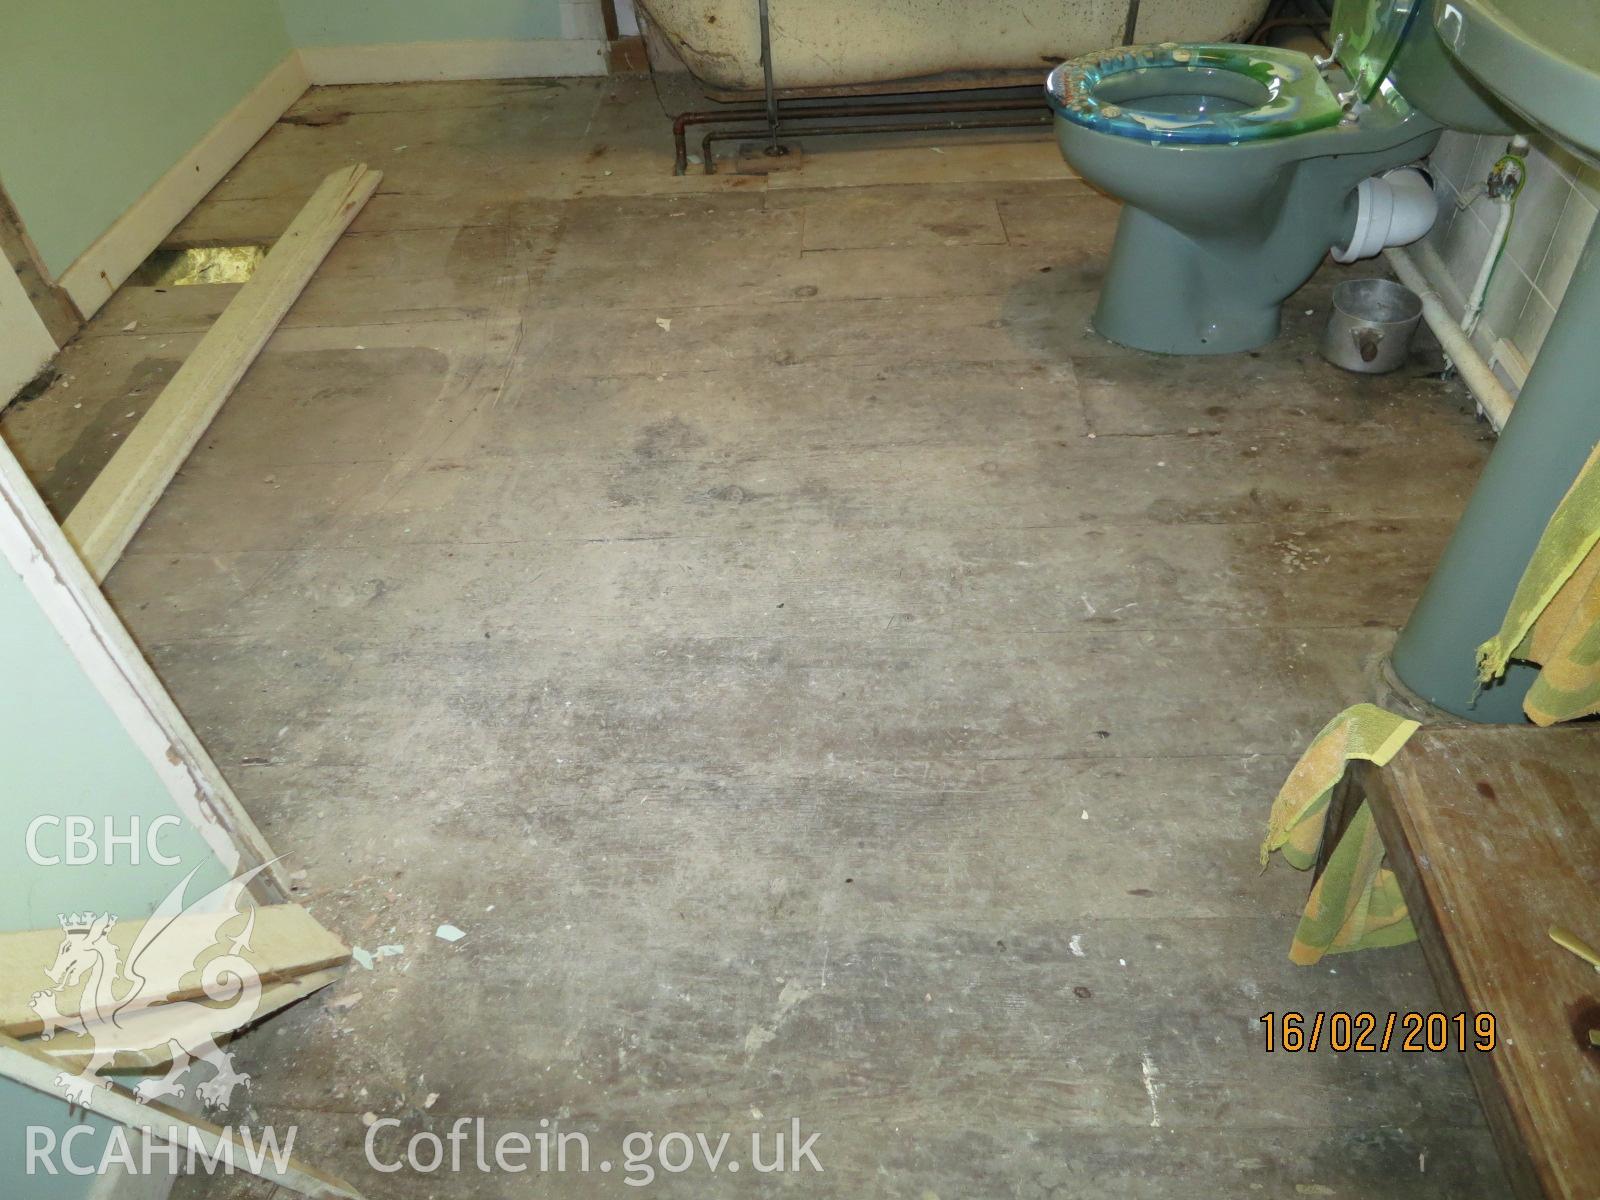 Interior bathroom floor in the house at Pencerrig Pellaf, Ffordd Uchaf, Harlech. Photographed by Kimberley Urch as part of photographic survey for planning application (ref. no. NP5/61/LB446A Snowdonia National Park Authority).